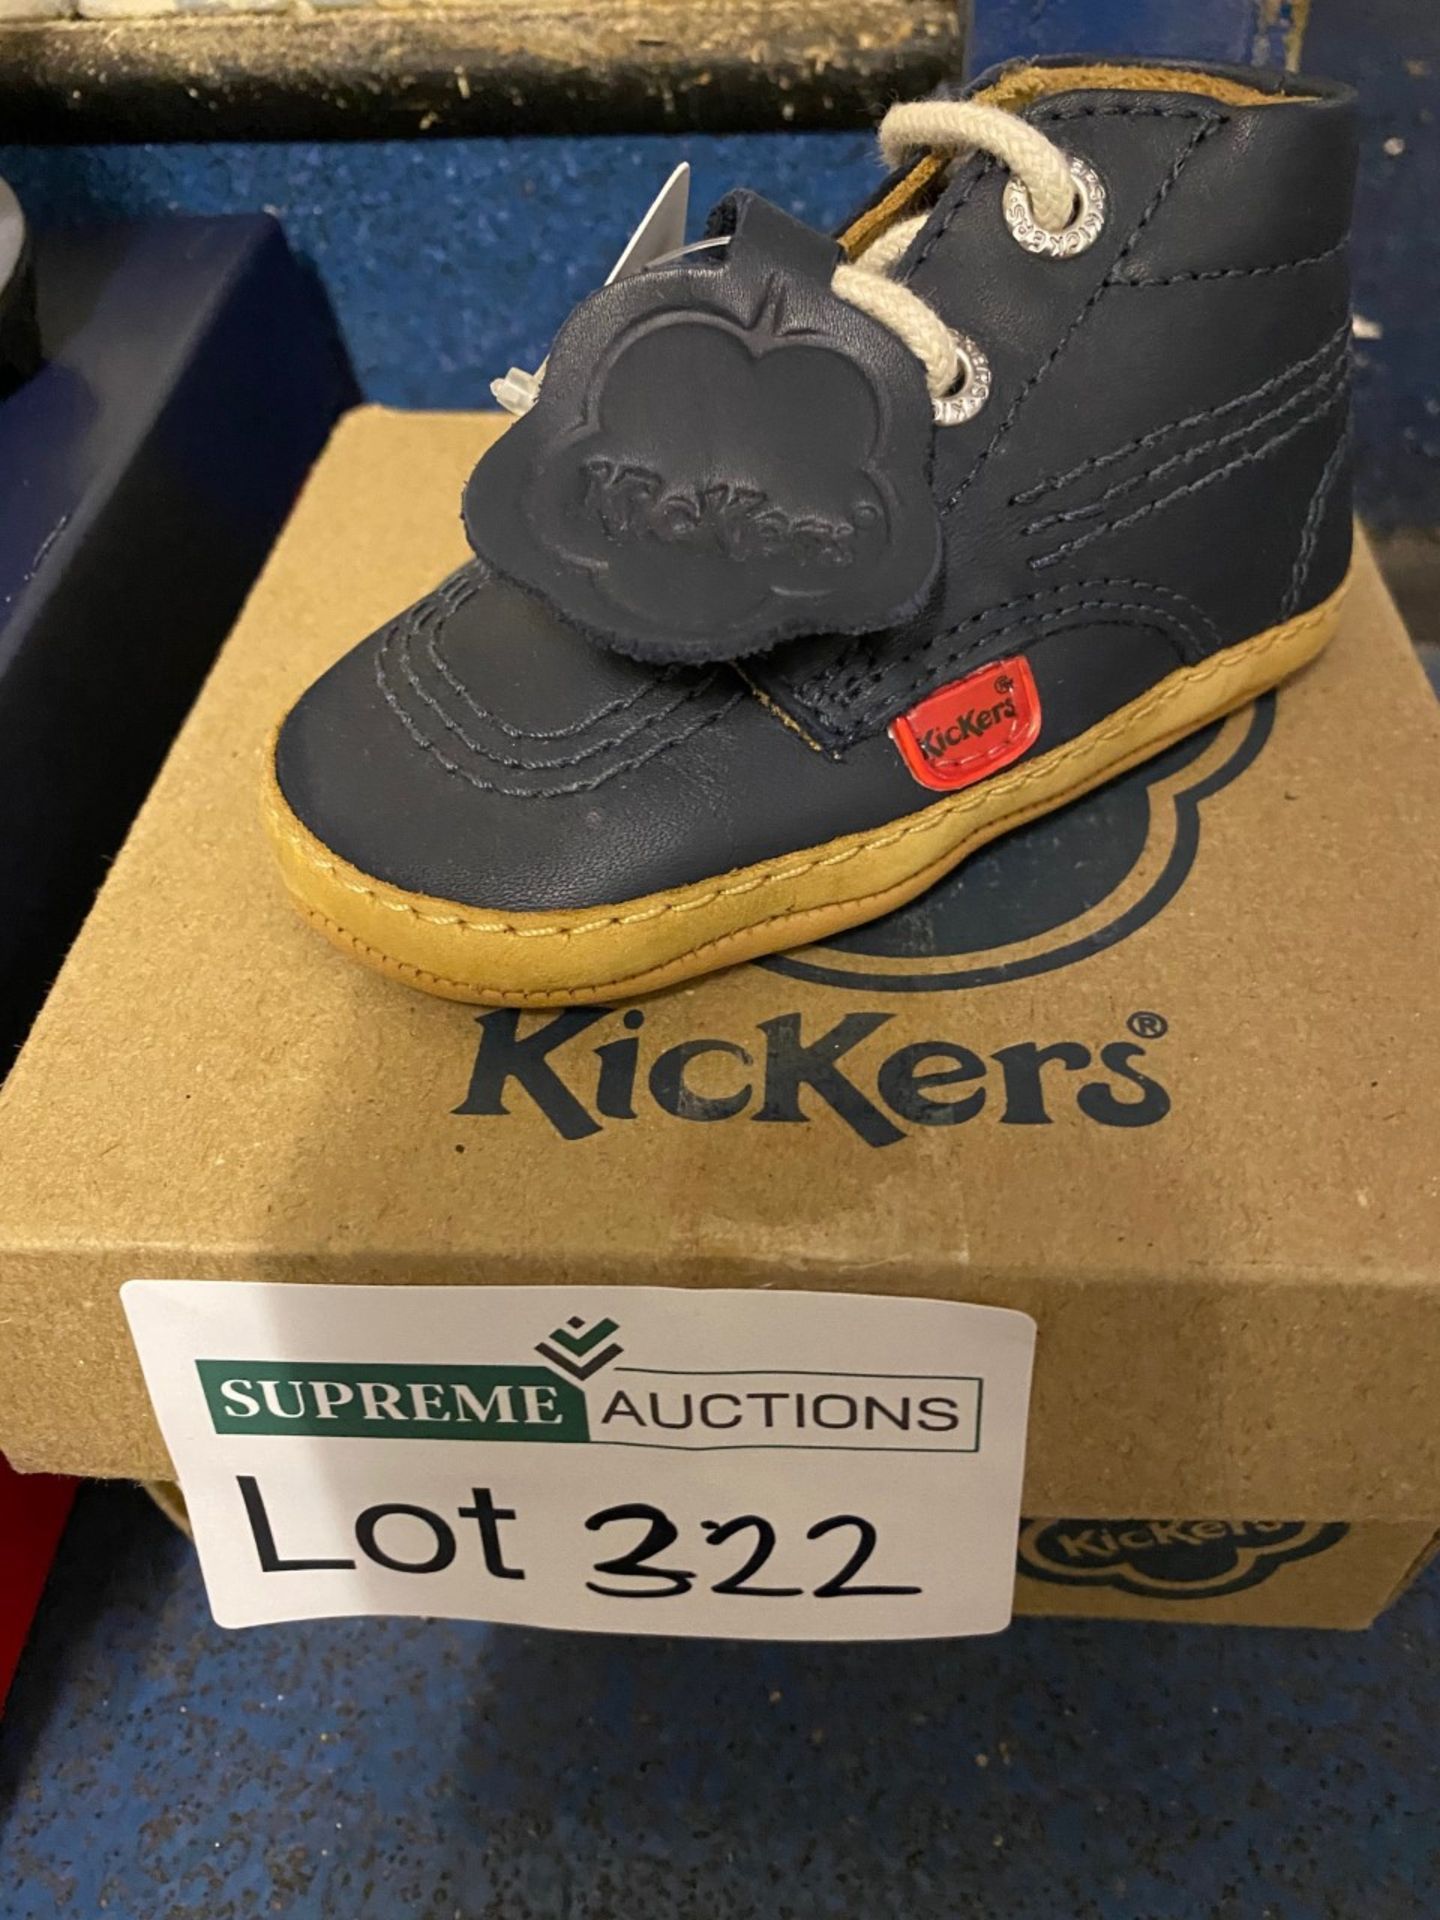 NEW & BOXED KICKERS NAVY SHOE SIZE INFANT 3 (322/21) - Image 2 of 2